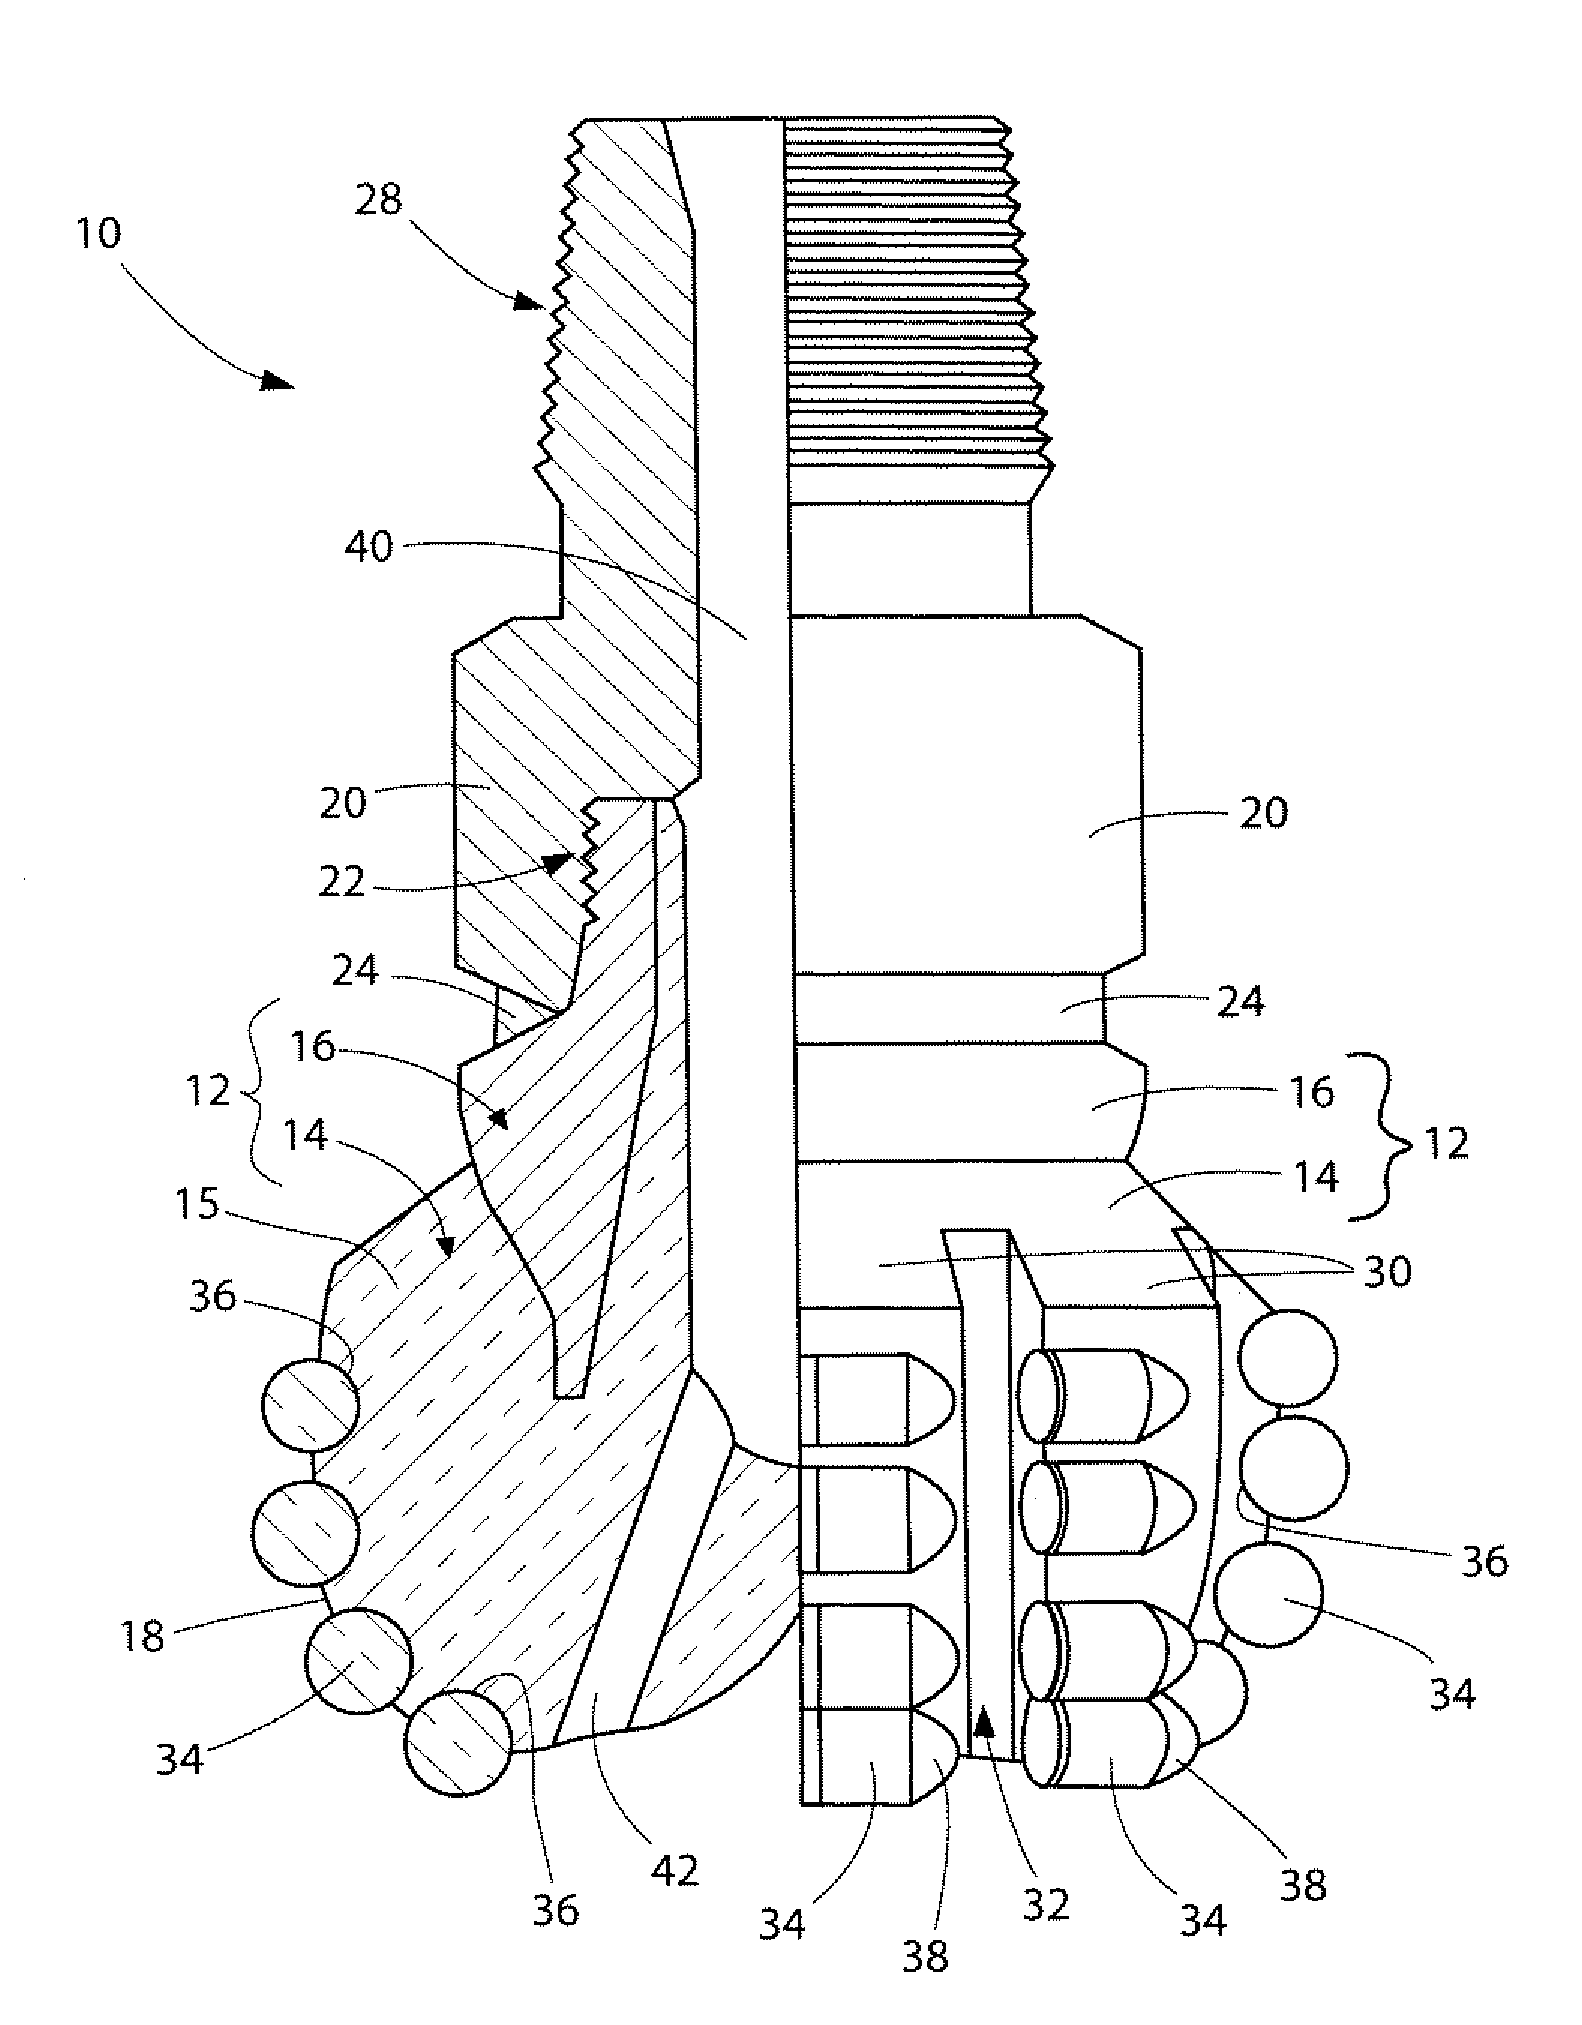 Silicon carbide composite materials, earth-boring tools comprising such materials, and methods for forming the same